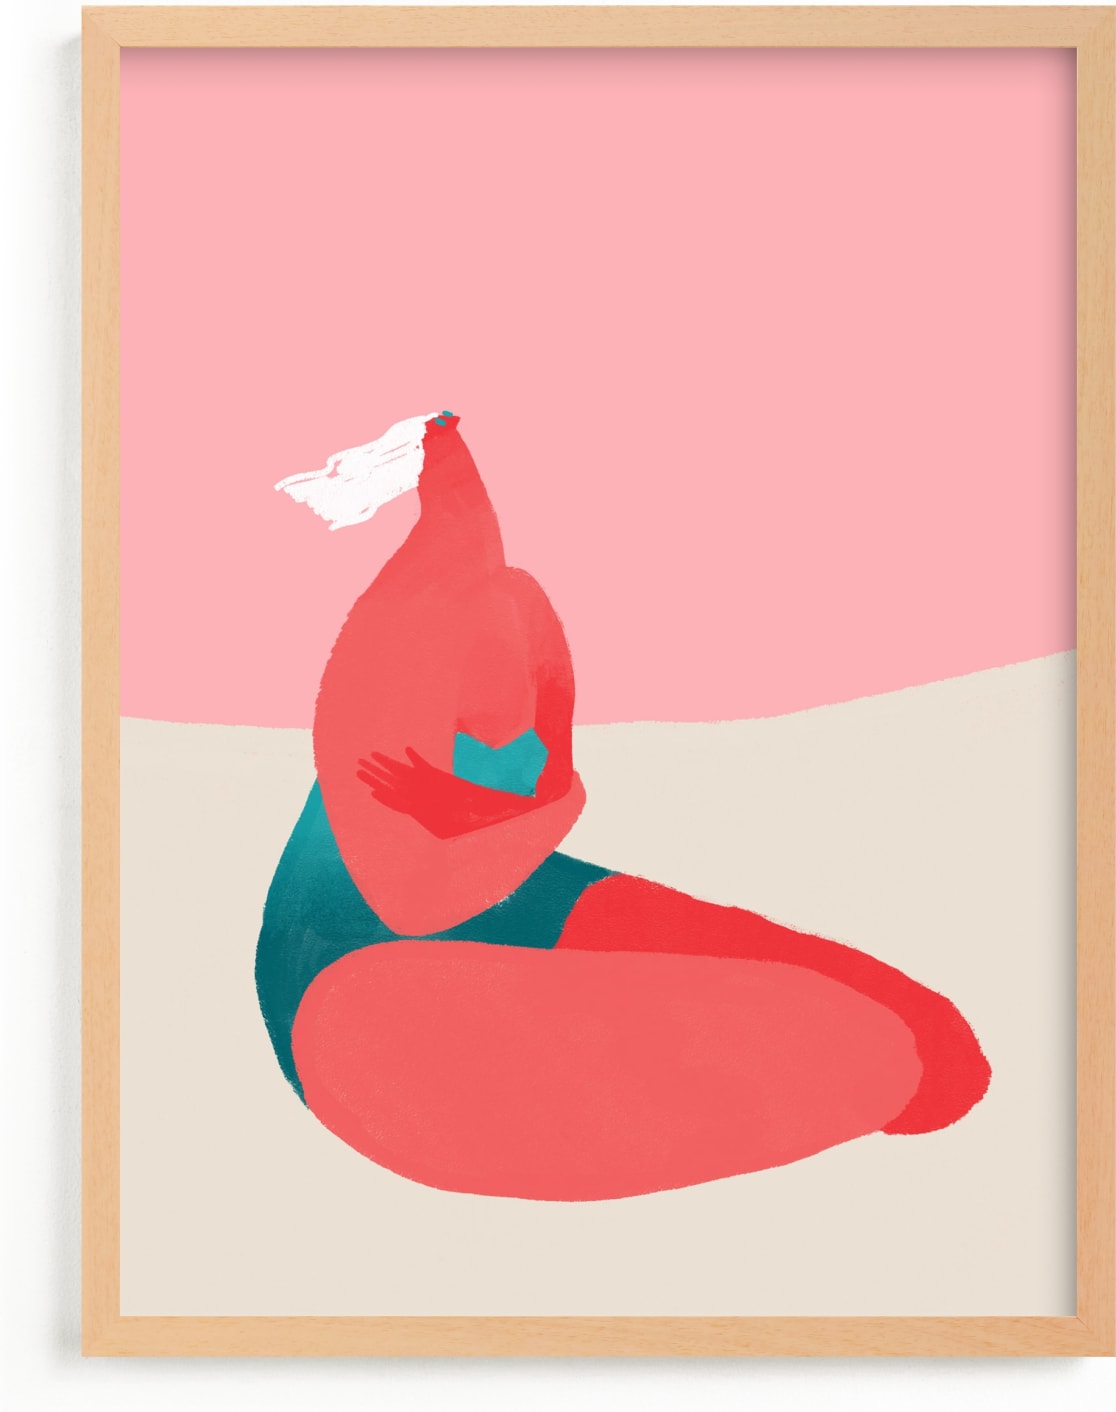 This is a pink art by Katie Spak called Breeze.